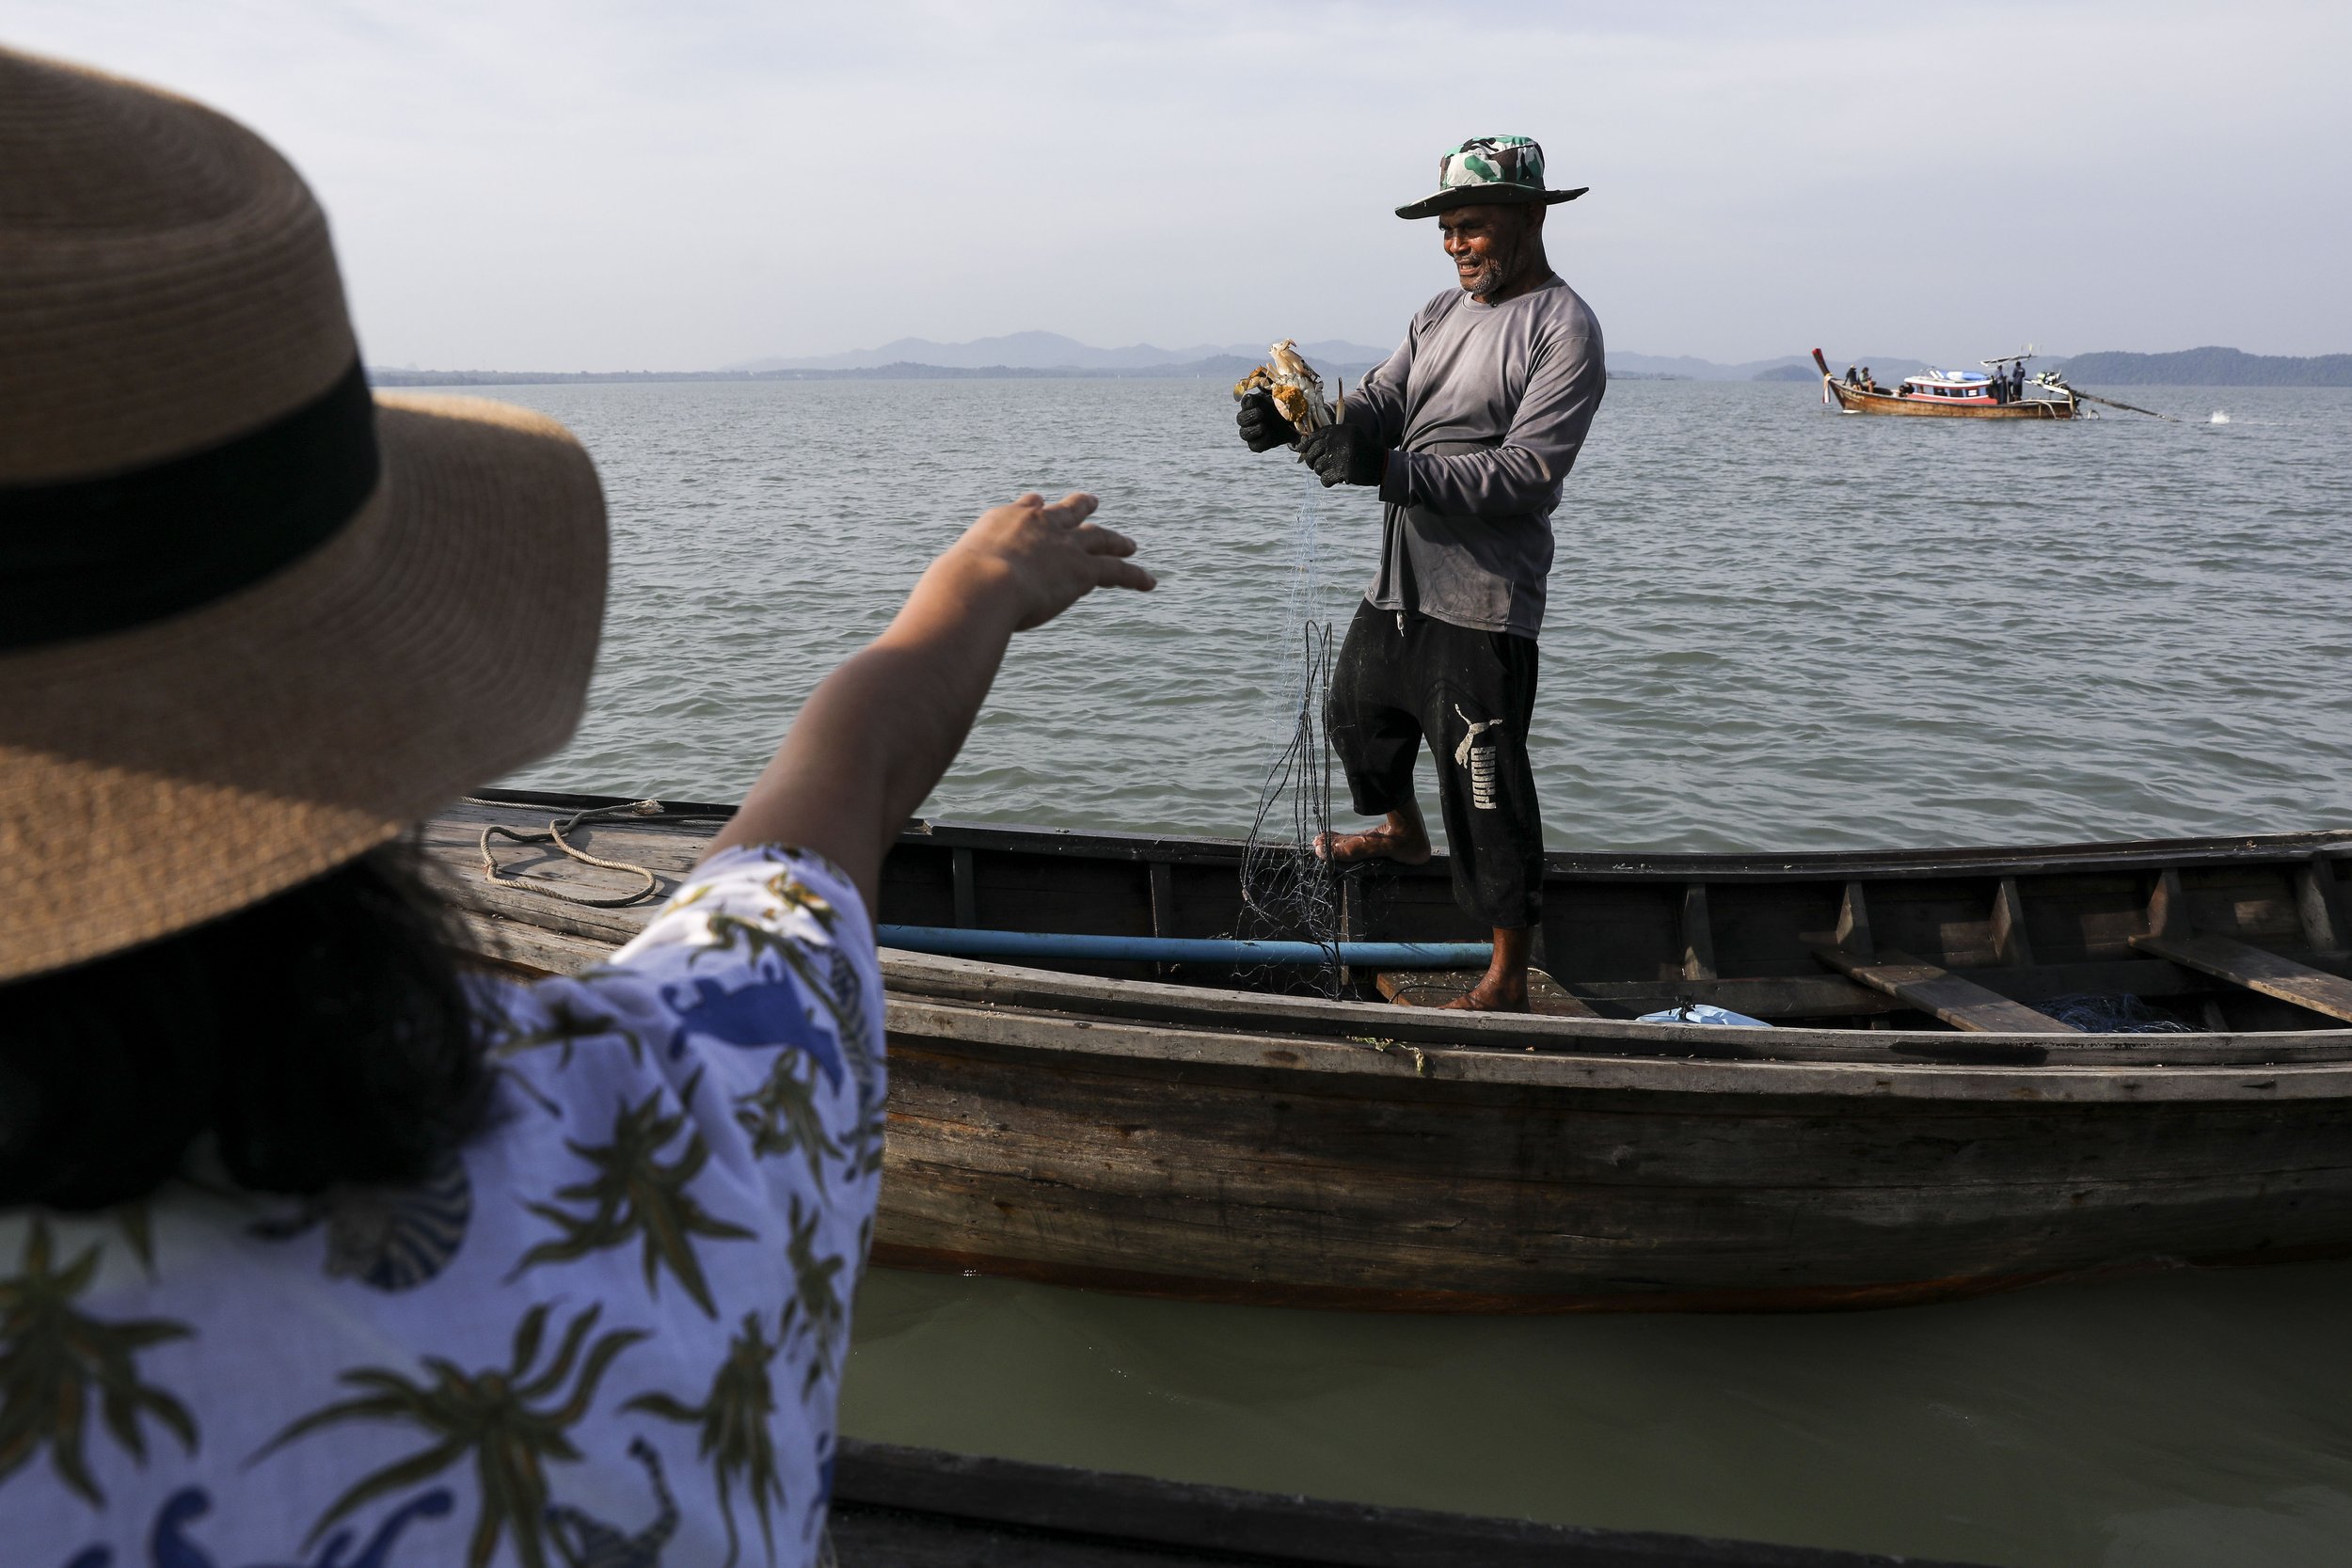  Chutatip “Nok” Suntaranon talks with a fisherman off of Koh Yao Noi, Thailand on Tuesday, April 19, 2022. "Southern people are all about genuine hospitality and broad smile and food... Southern people are proud people," Nok said of the visit to Koh 